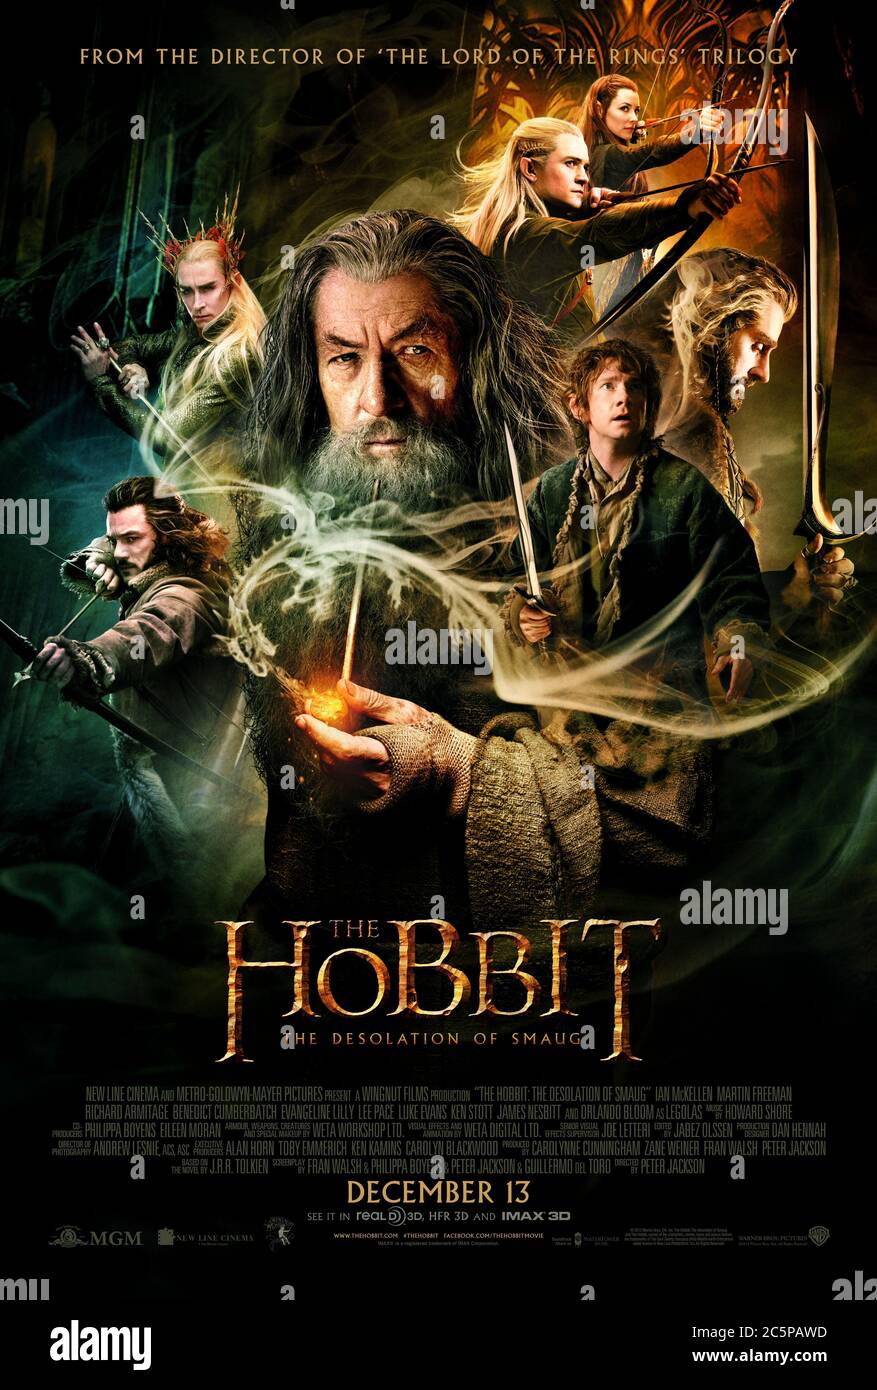 The Hobbit: The Desolation of Smaug (2013) directed by Peter Jackson and starring Ian McKellen, Martin Freeman, Richard Armitage and James Nesbitt. Second part of the trilogy based on J. R. R. Tolkien's book The Hobbit, Bilbo Baggins joins the dwarves in their fight against the dragon Smaug. Stock Photo